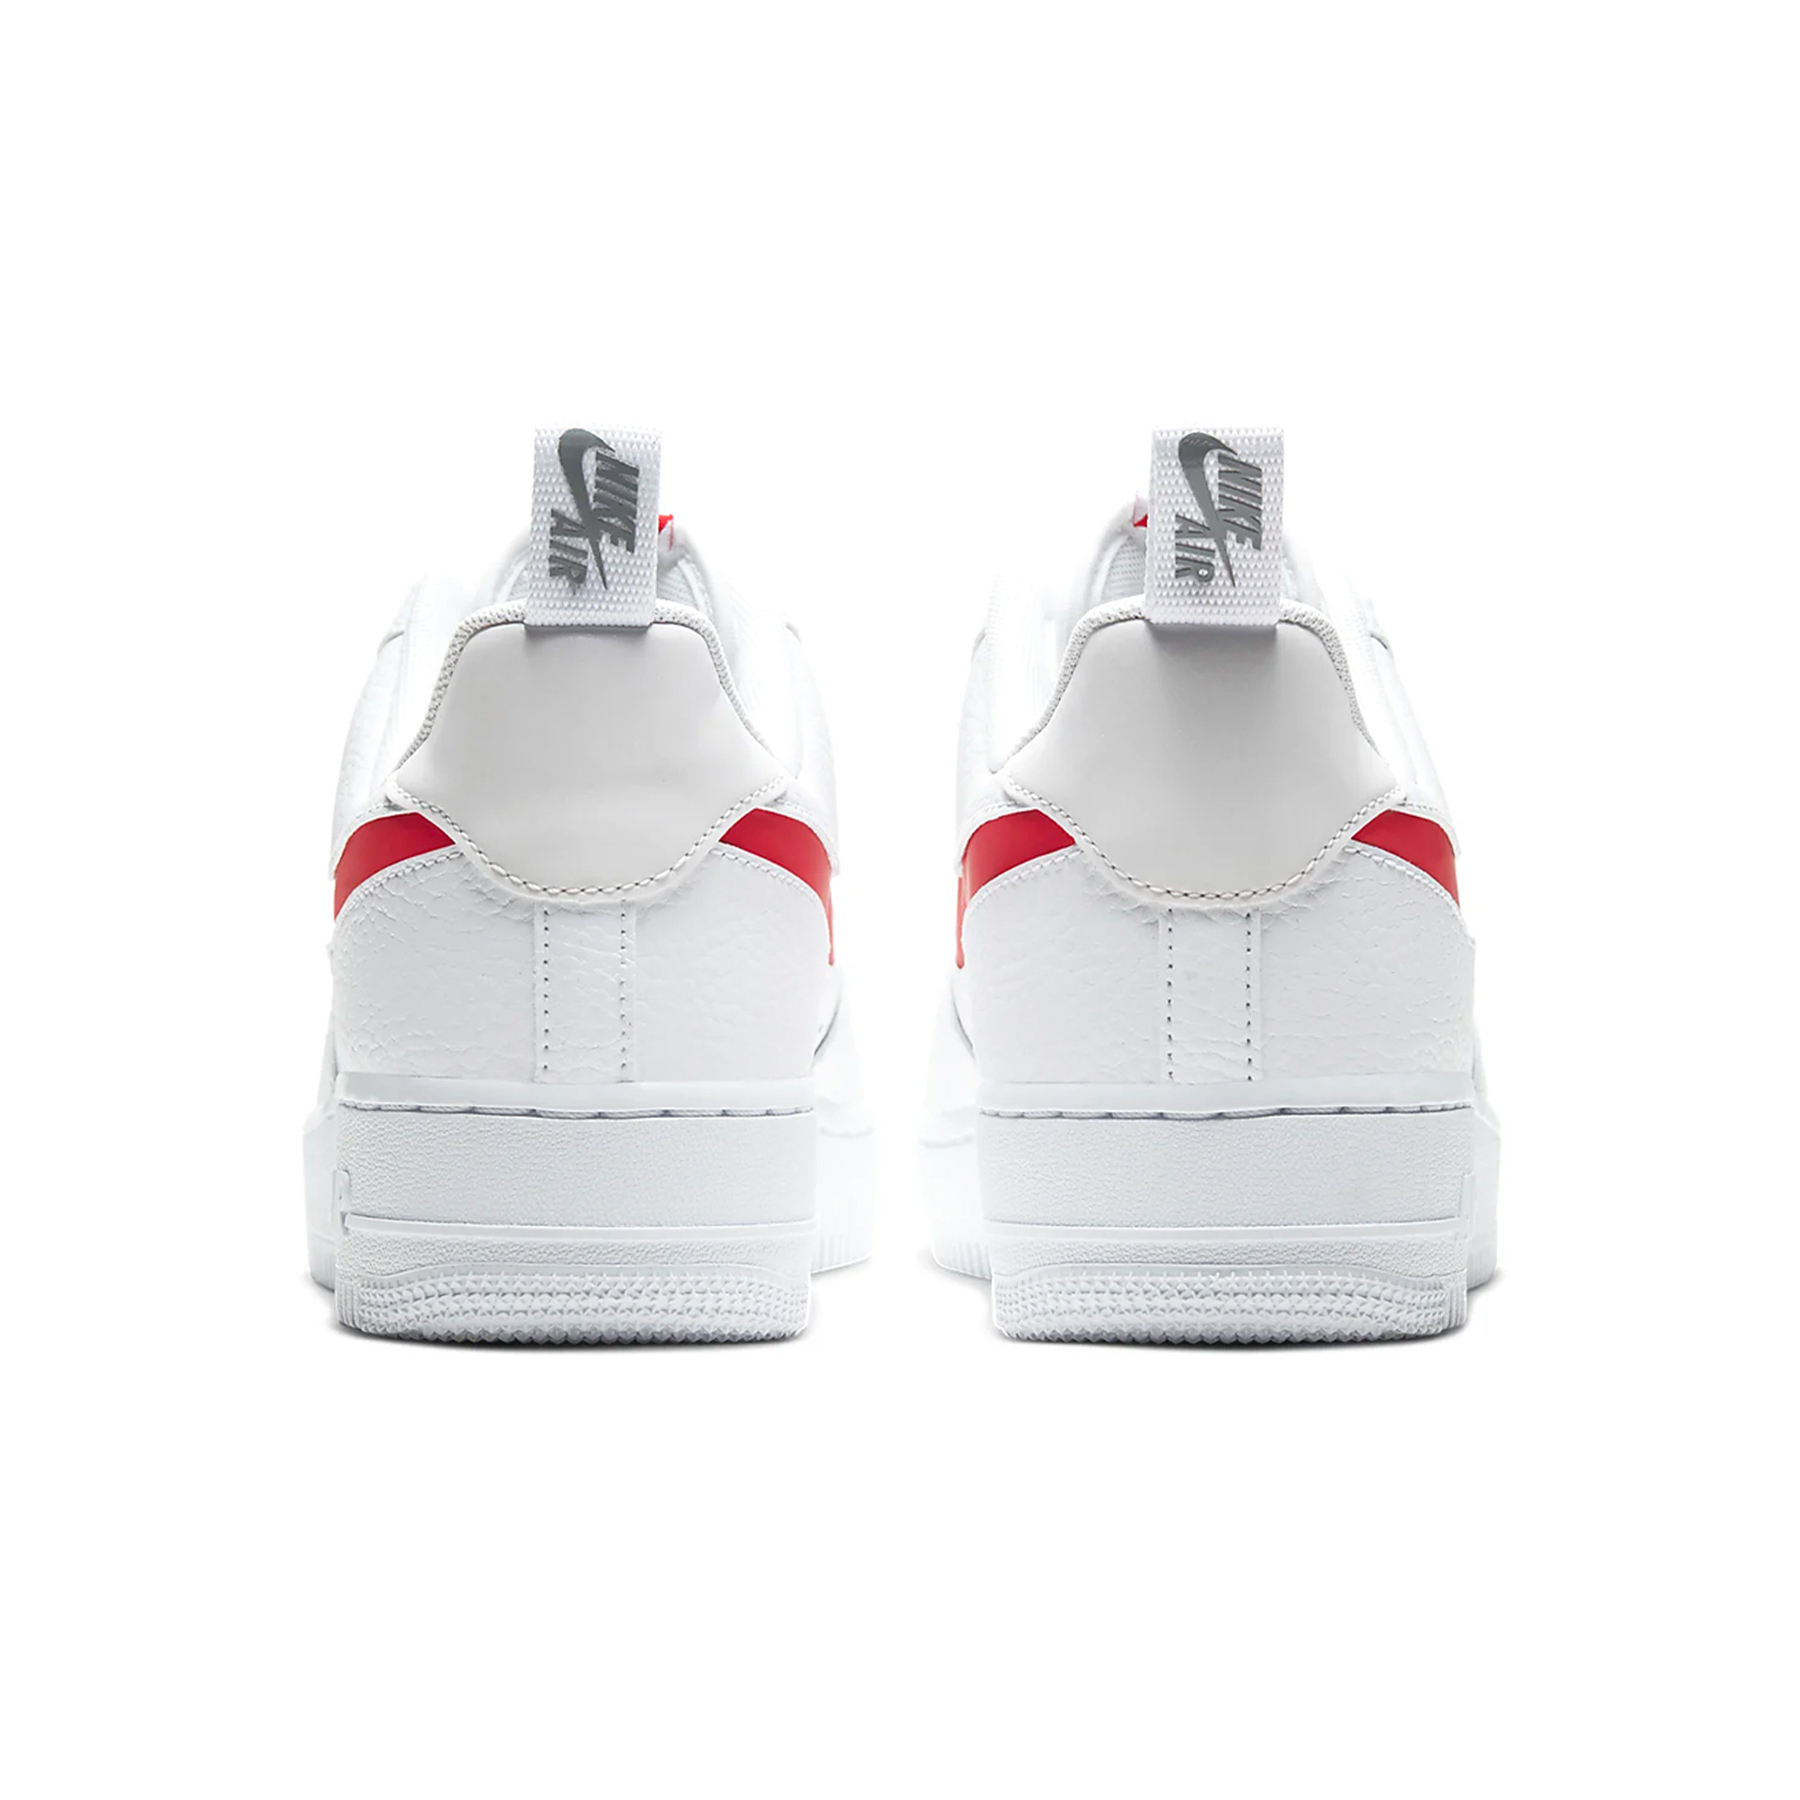 air force lv8 utility red